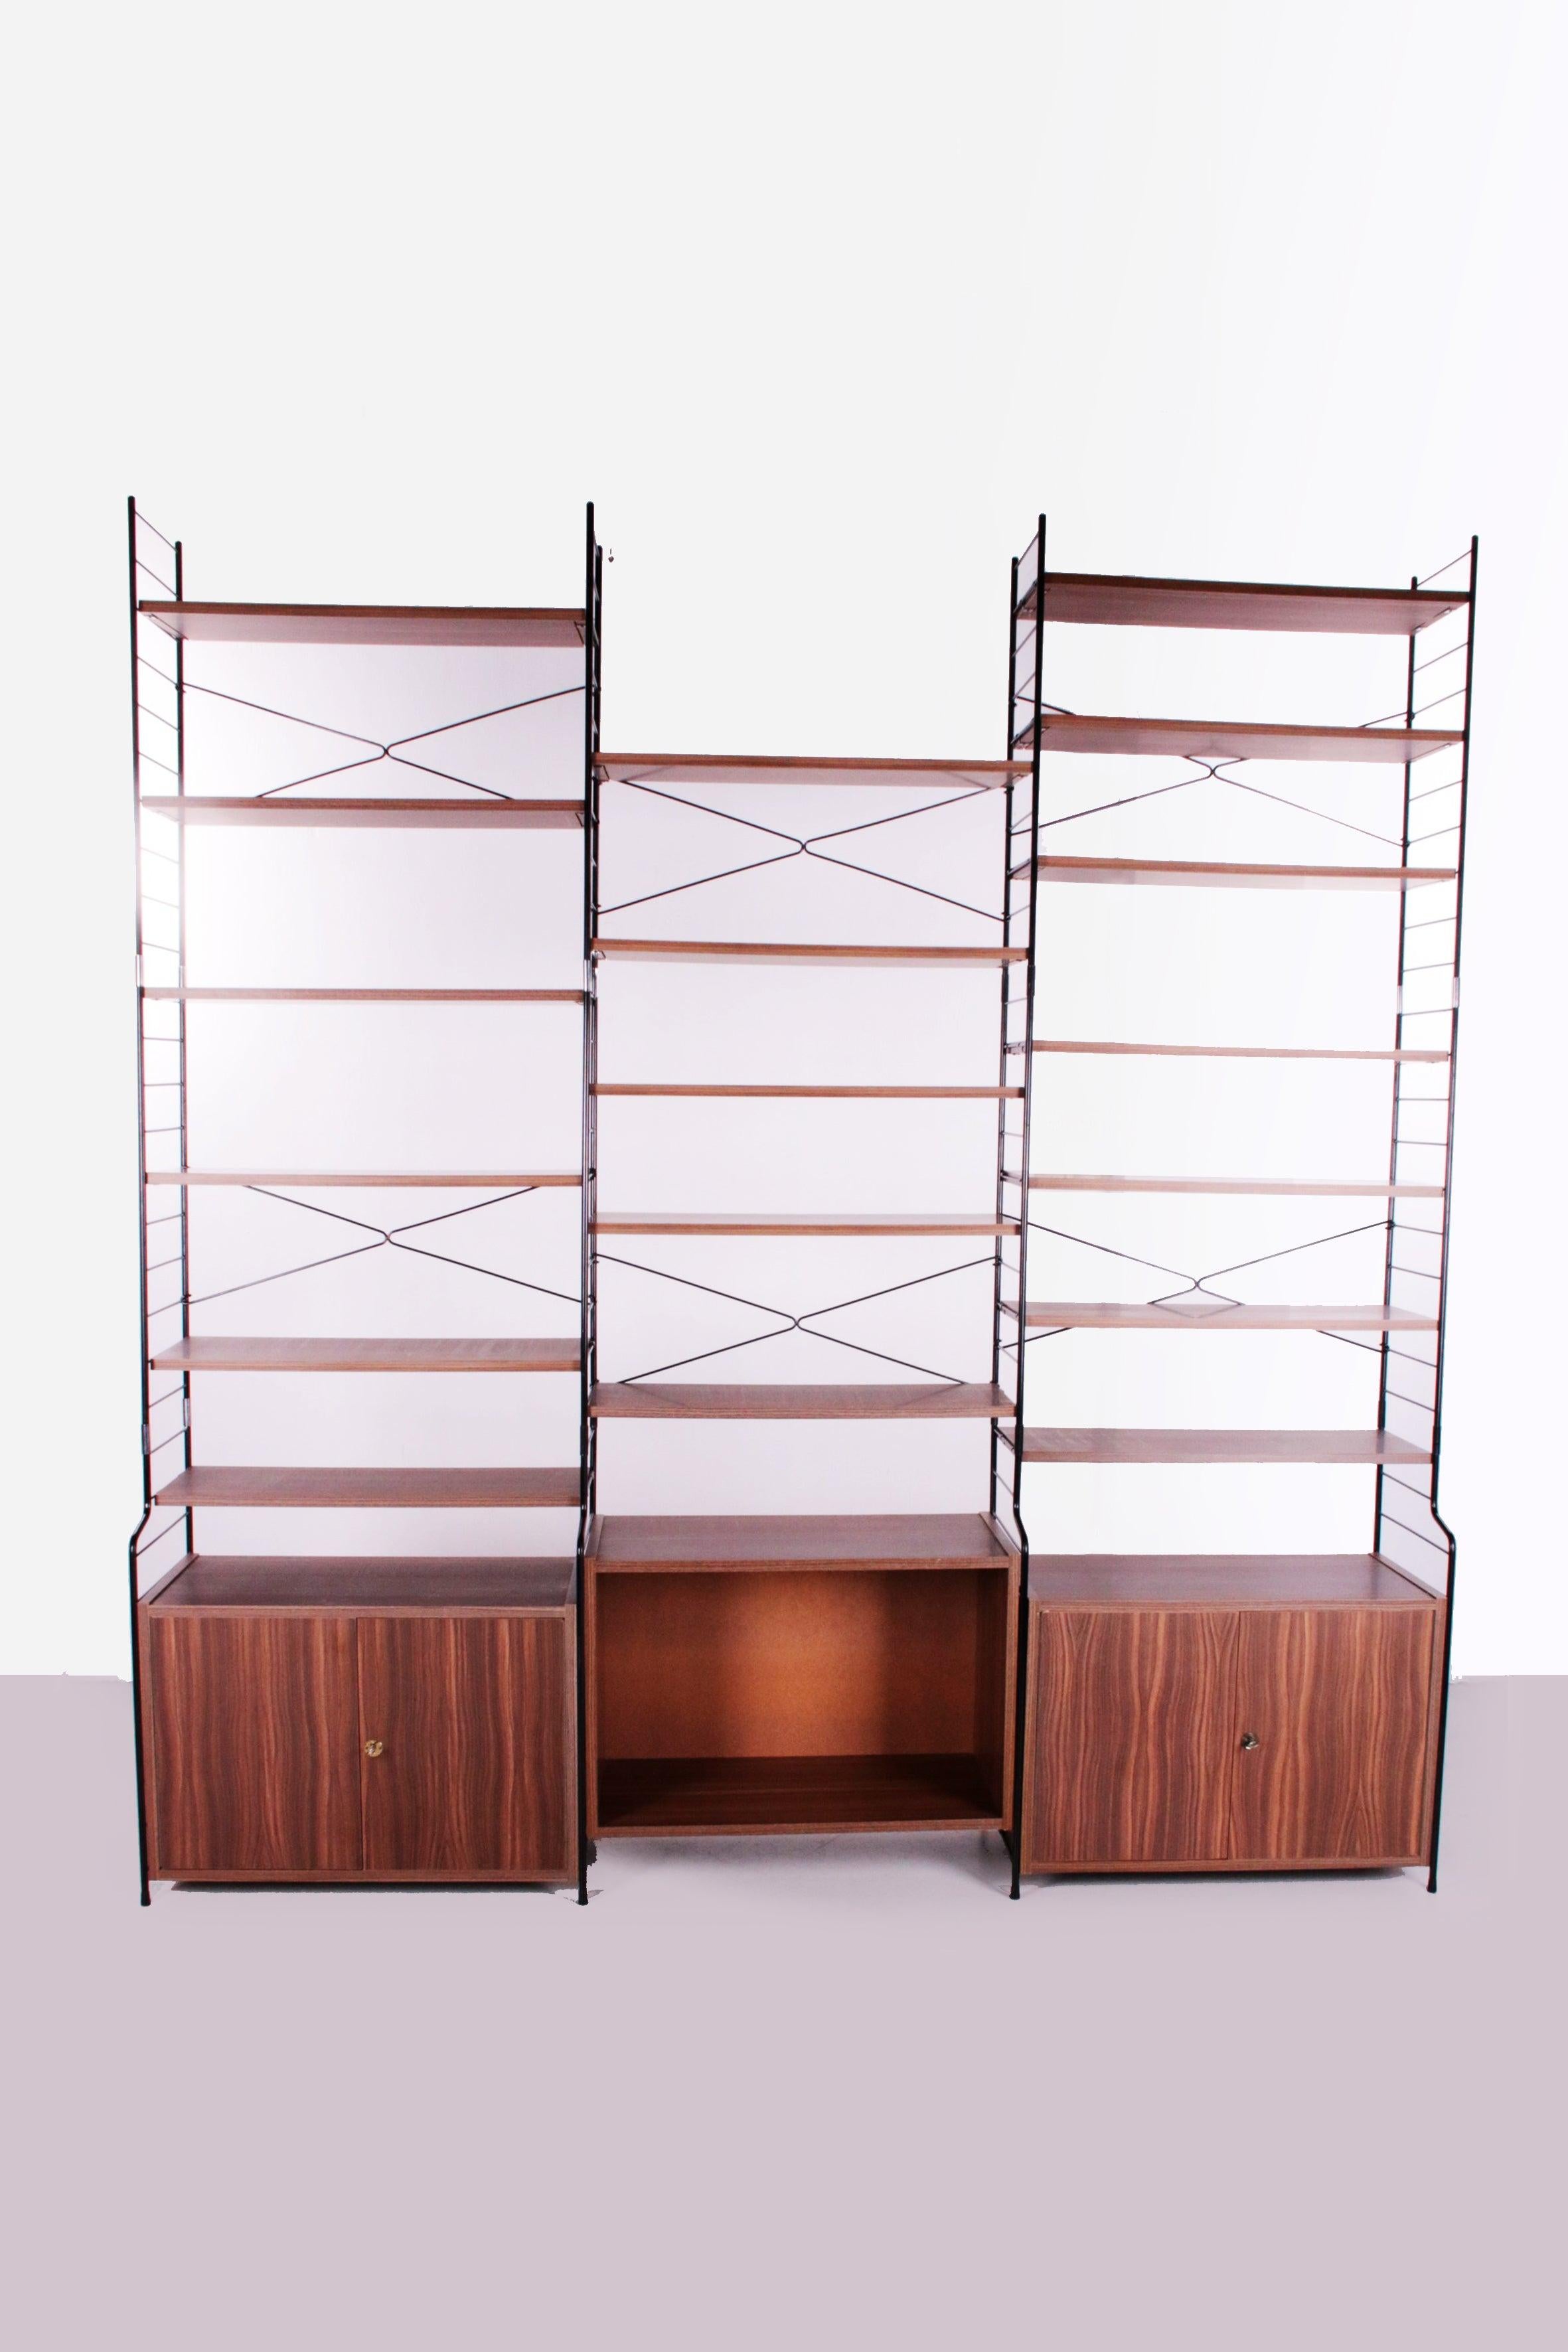 Large WHB Vintage Wall unit or string bookcase 1960 Germany


A beautiful large vintage WHB regal wall unit in walnut veneer, dating from the 1960s.

The condition is excellent for its age, few signs of wear visible,

The wood has a beautiful color